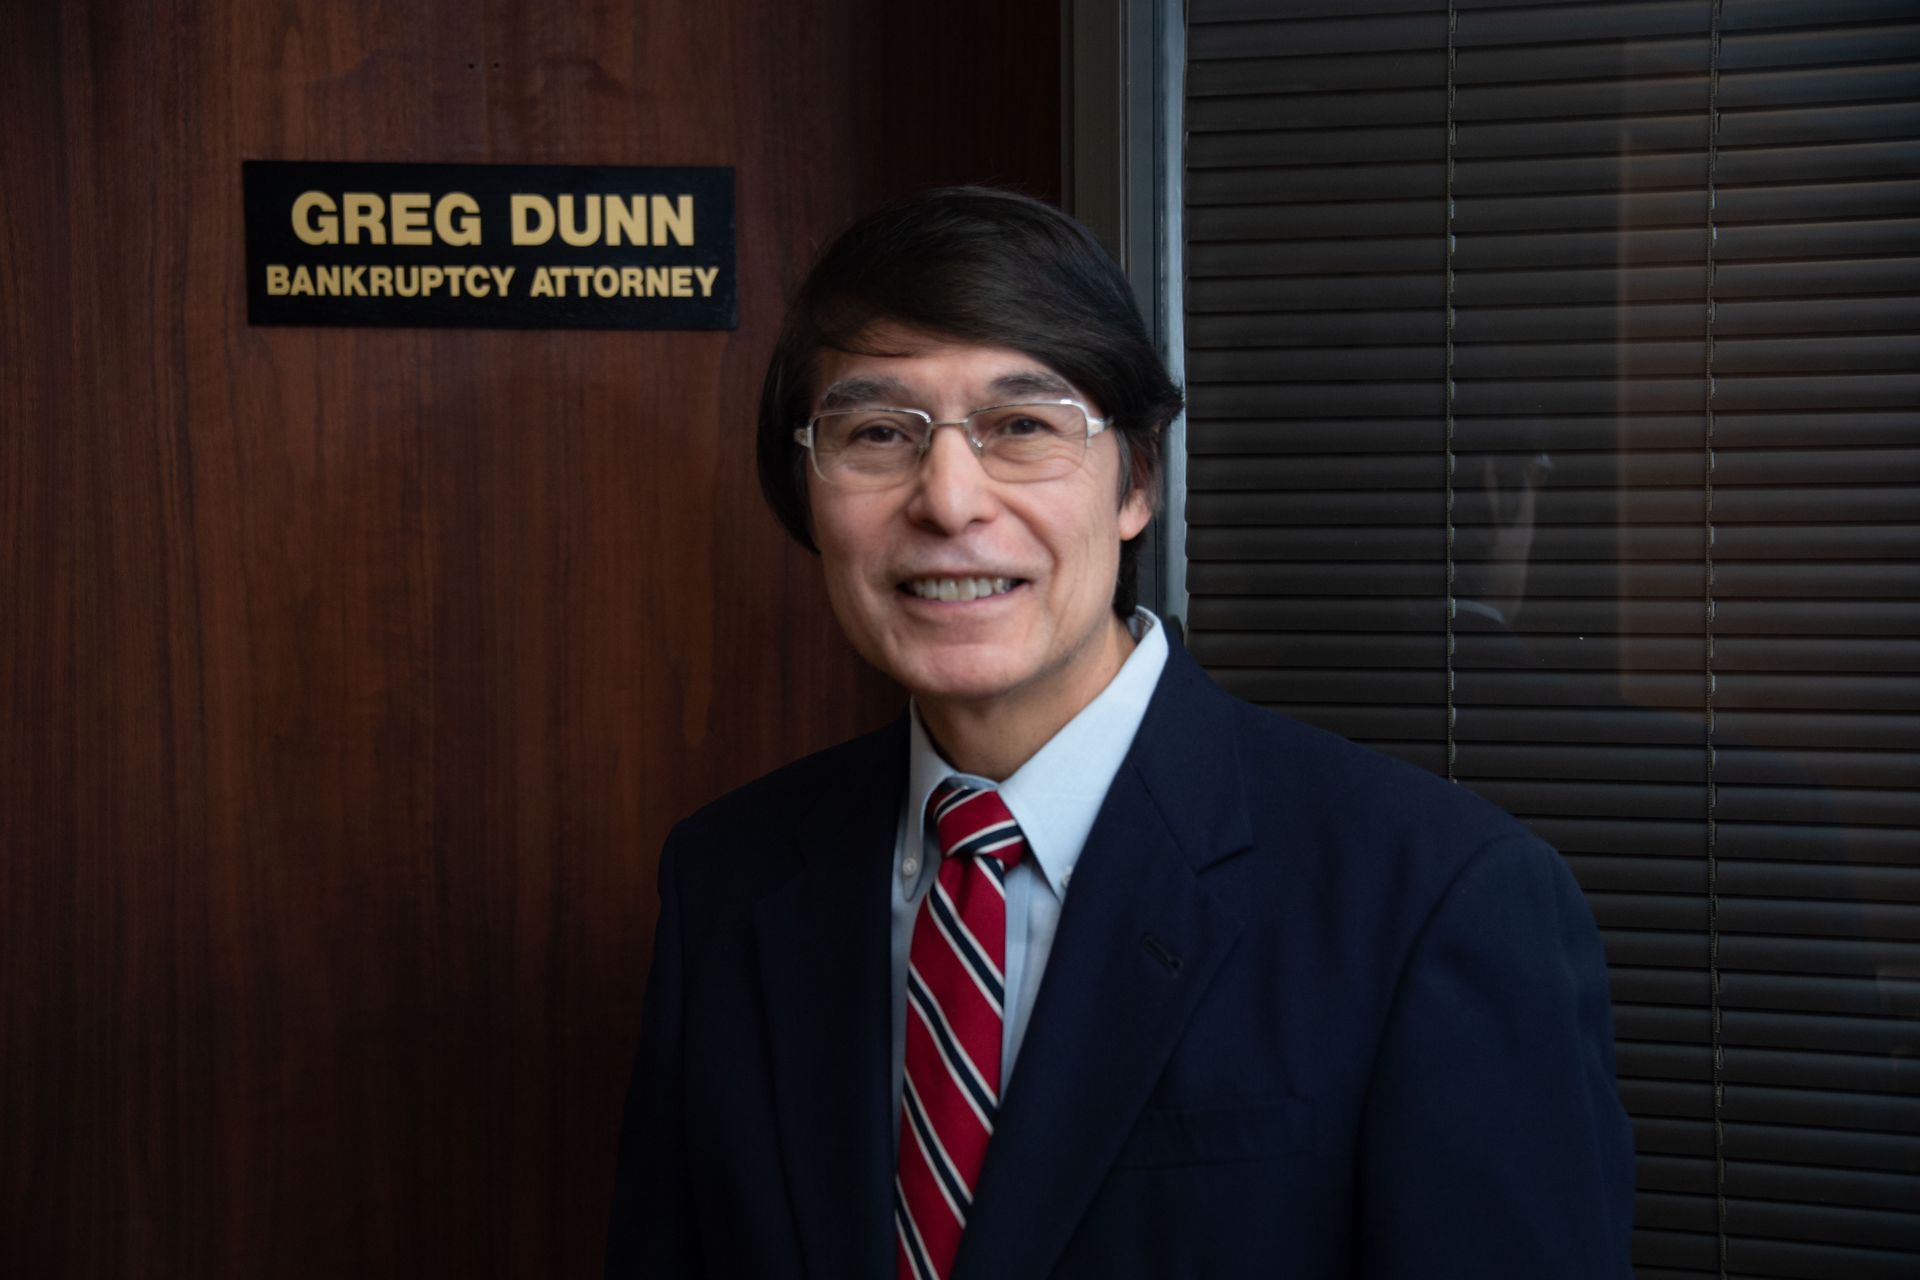 Bankruptcy Attorney Greg Dunn